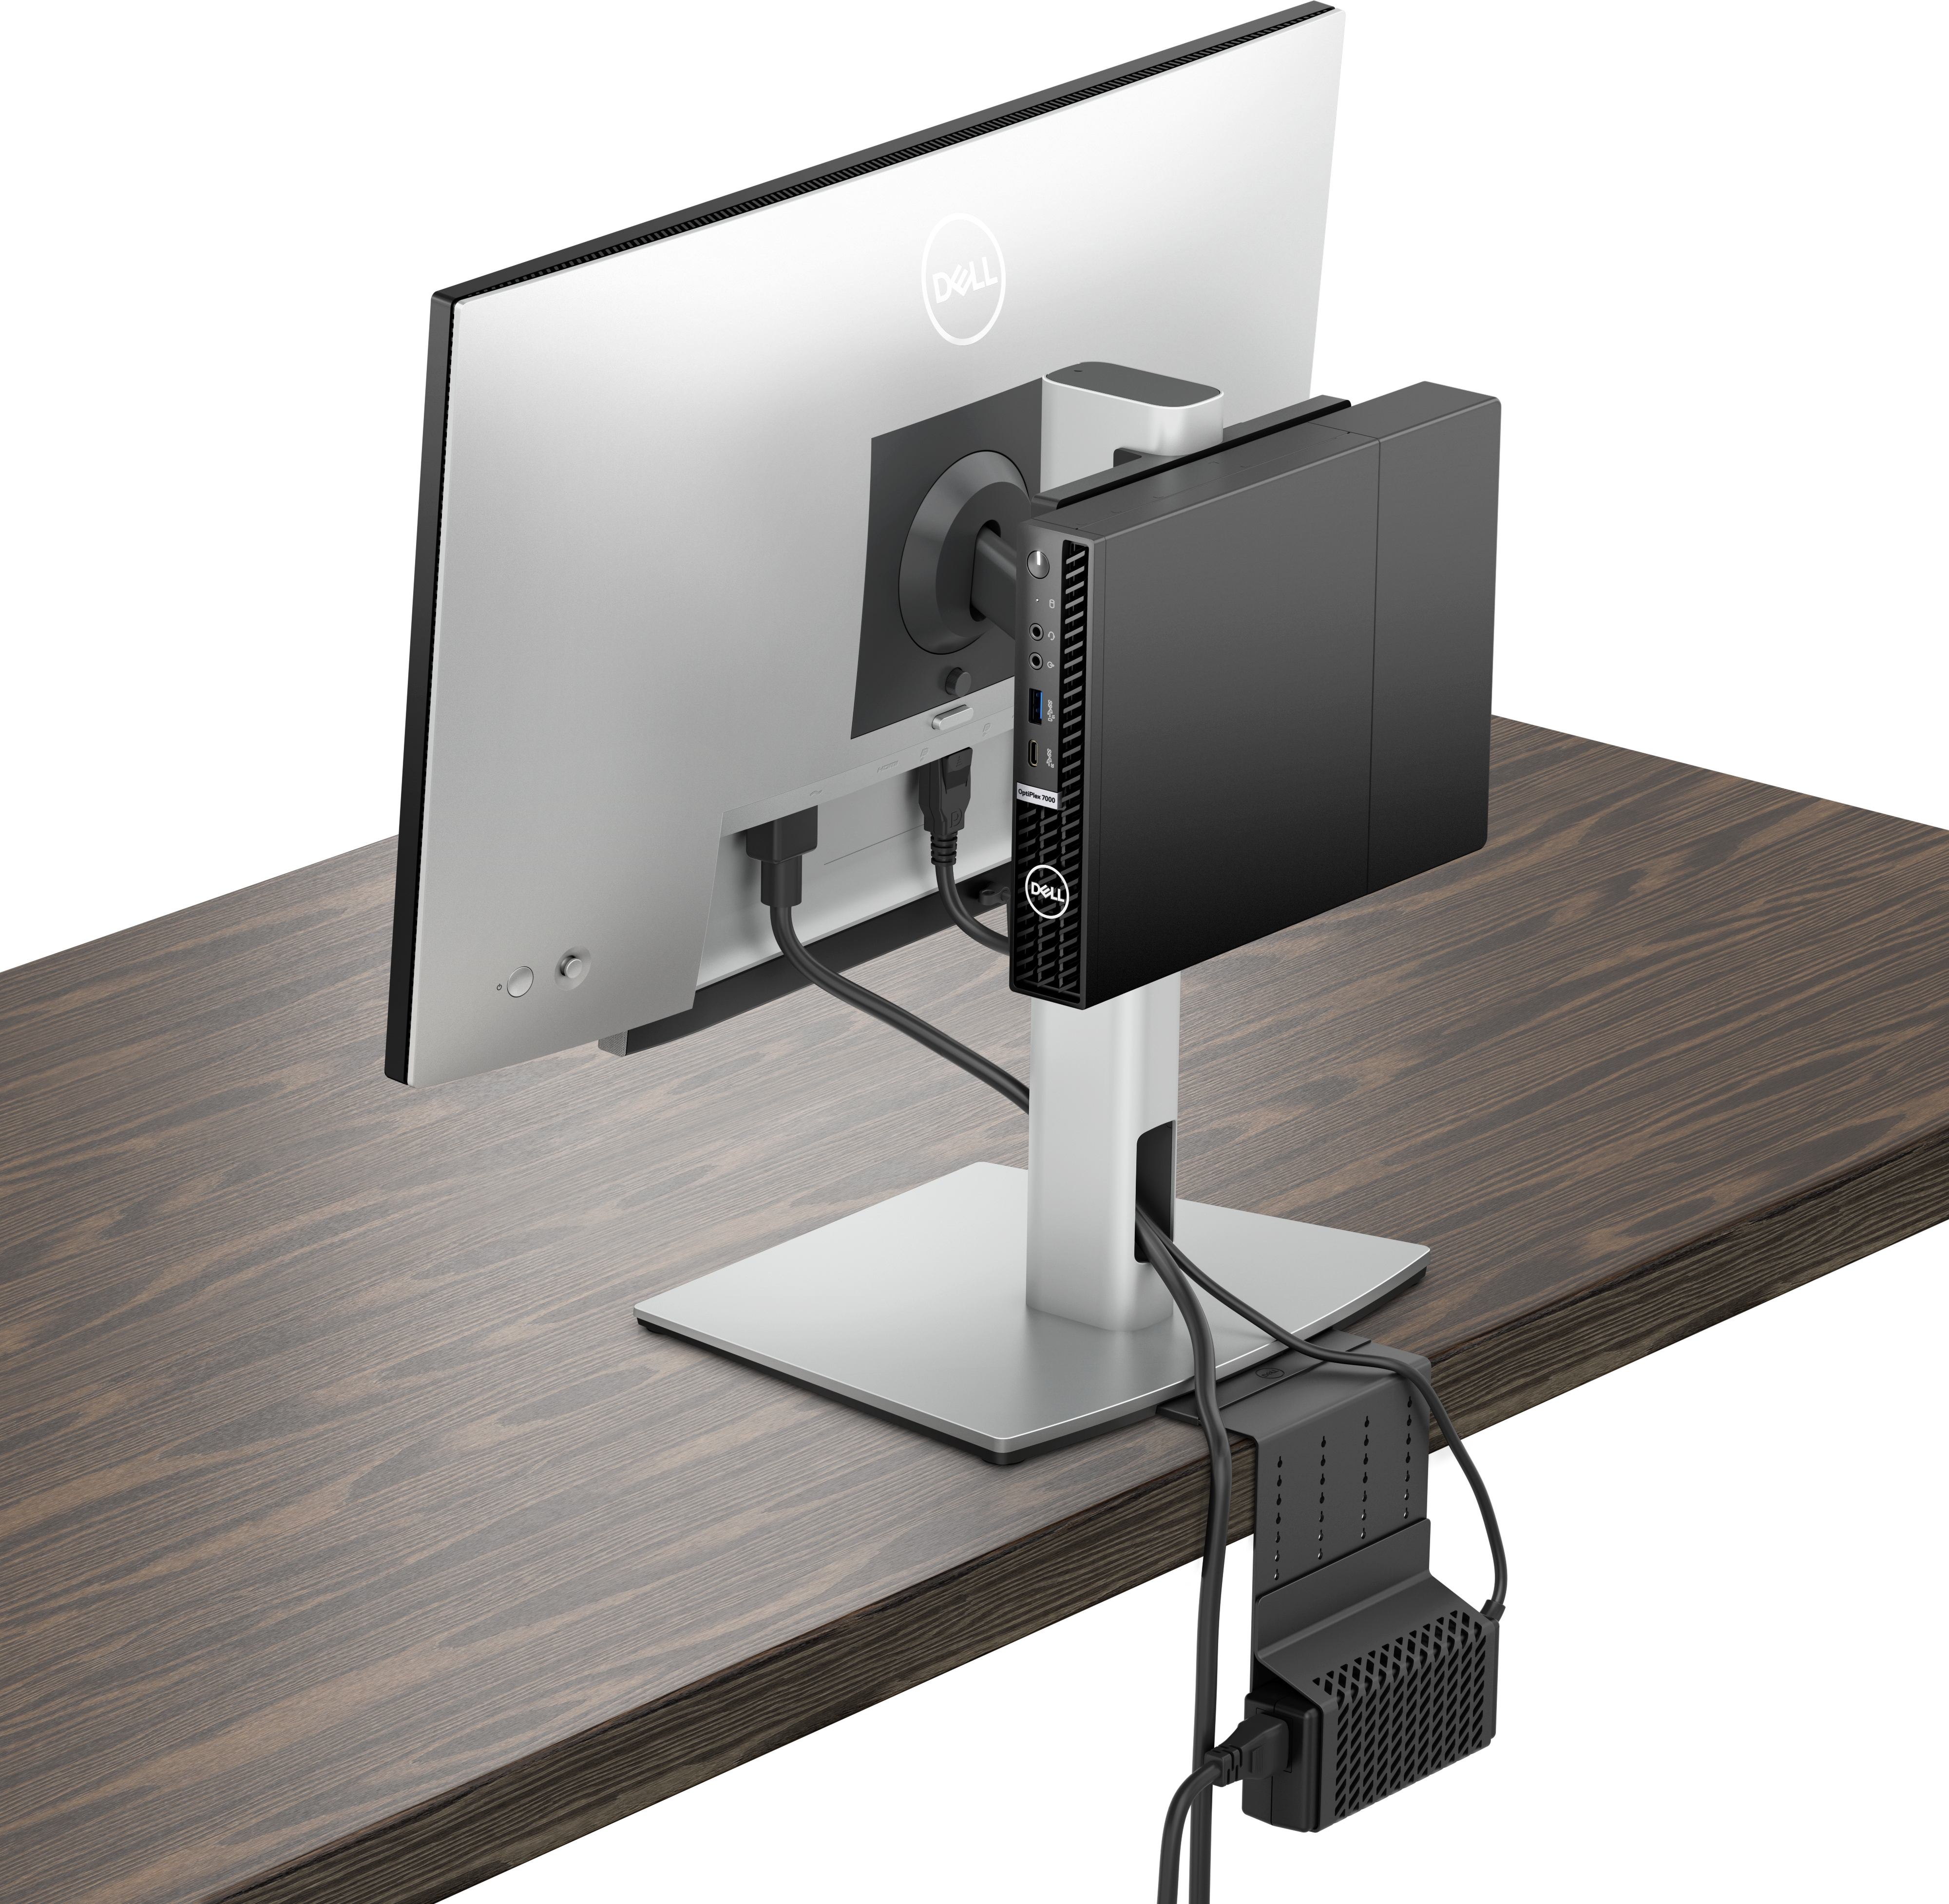 Dell Micro Form Factor All-in-One Stand MFS22 - Monitor-/Desktop-Ständer (19"-27")